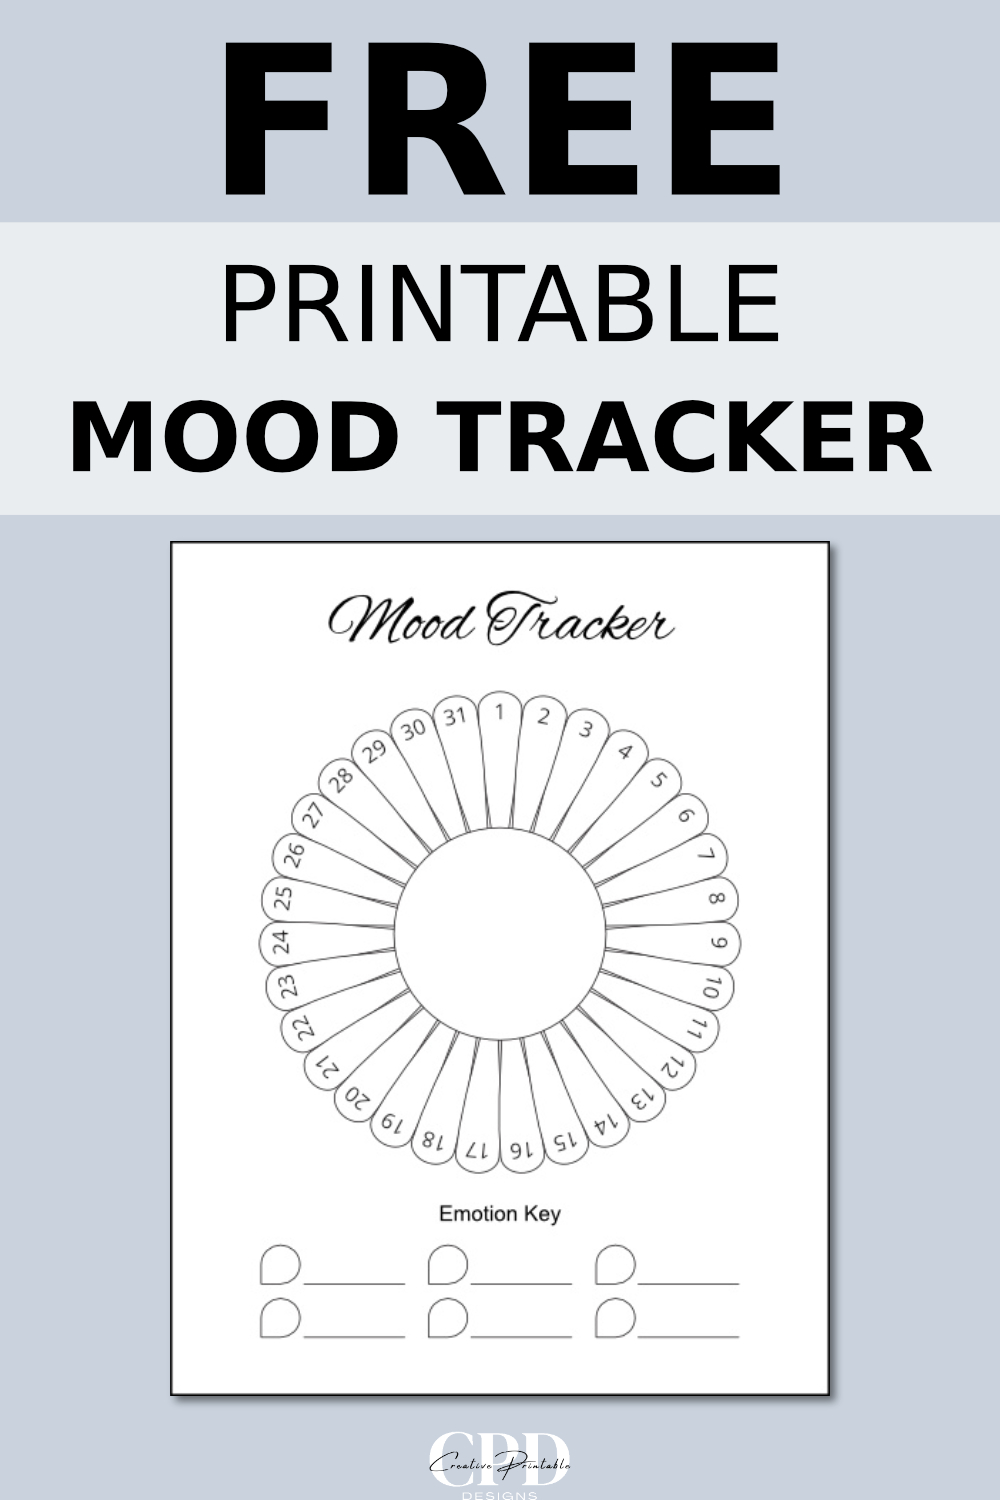 Free Printable Mood Tracker With Flower Petals